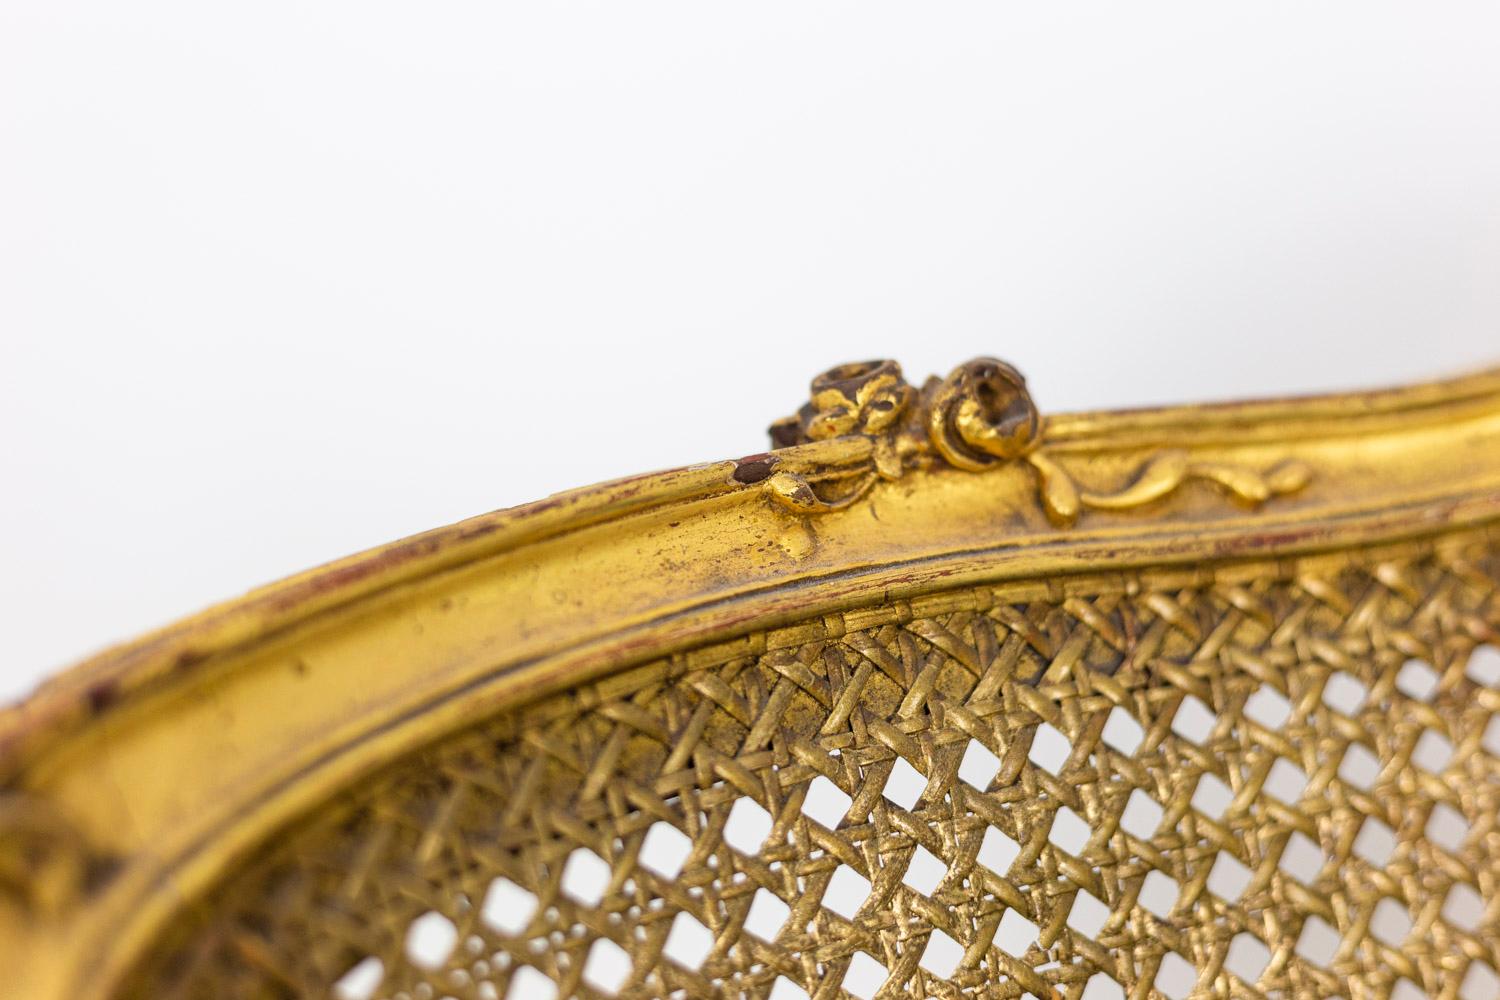 Cane Louis XV Style Marquise Armchair in Giltwood, circa 1880